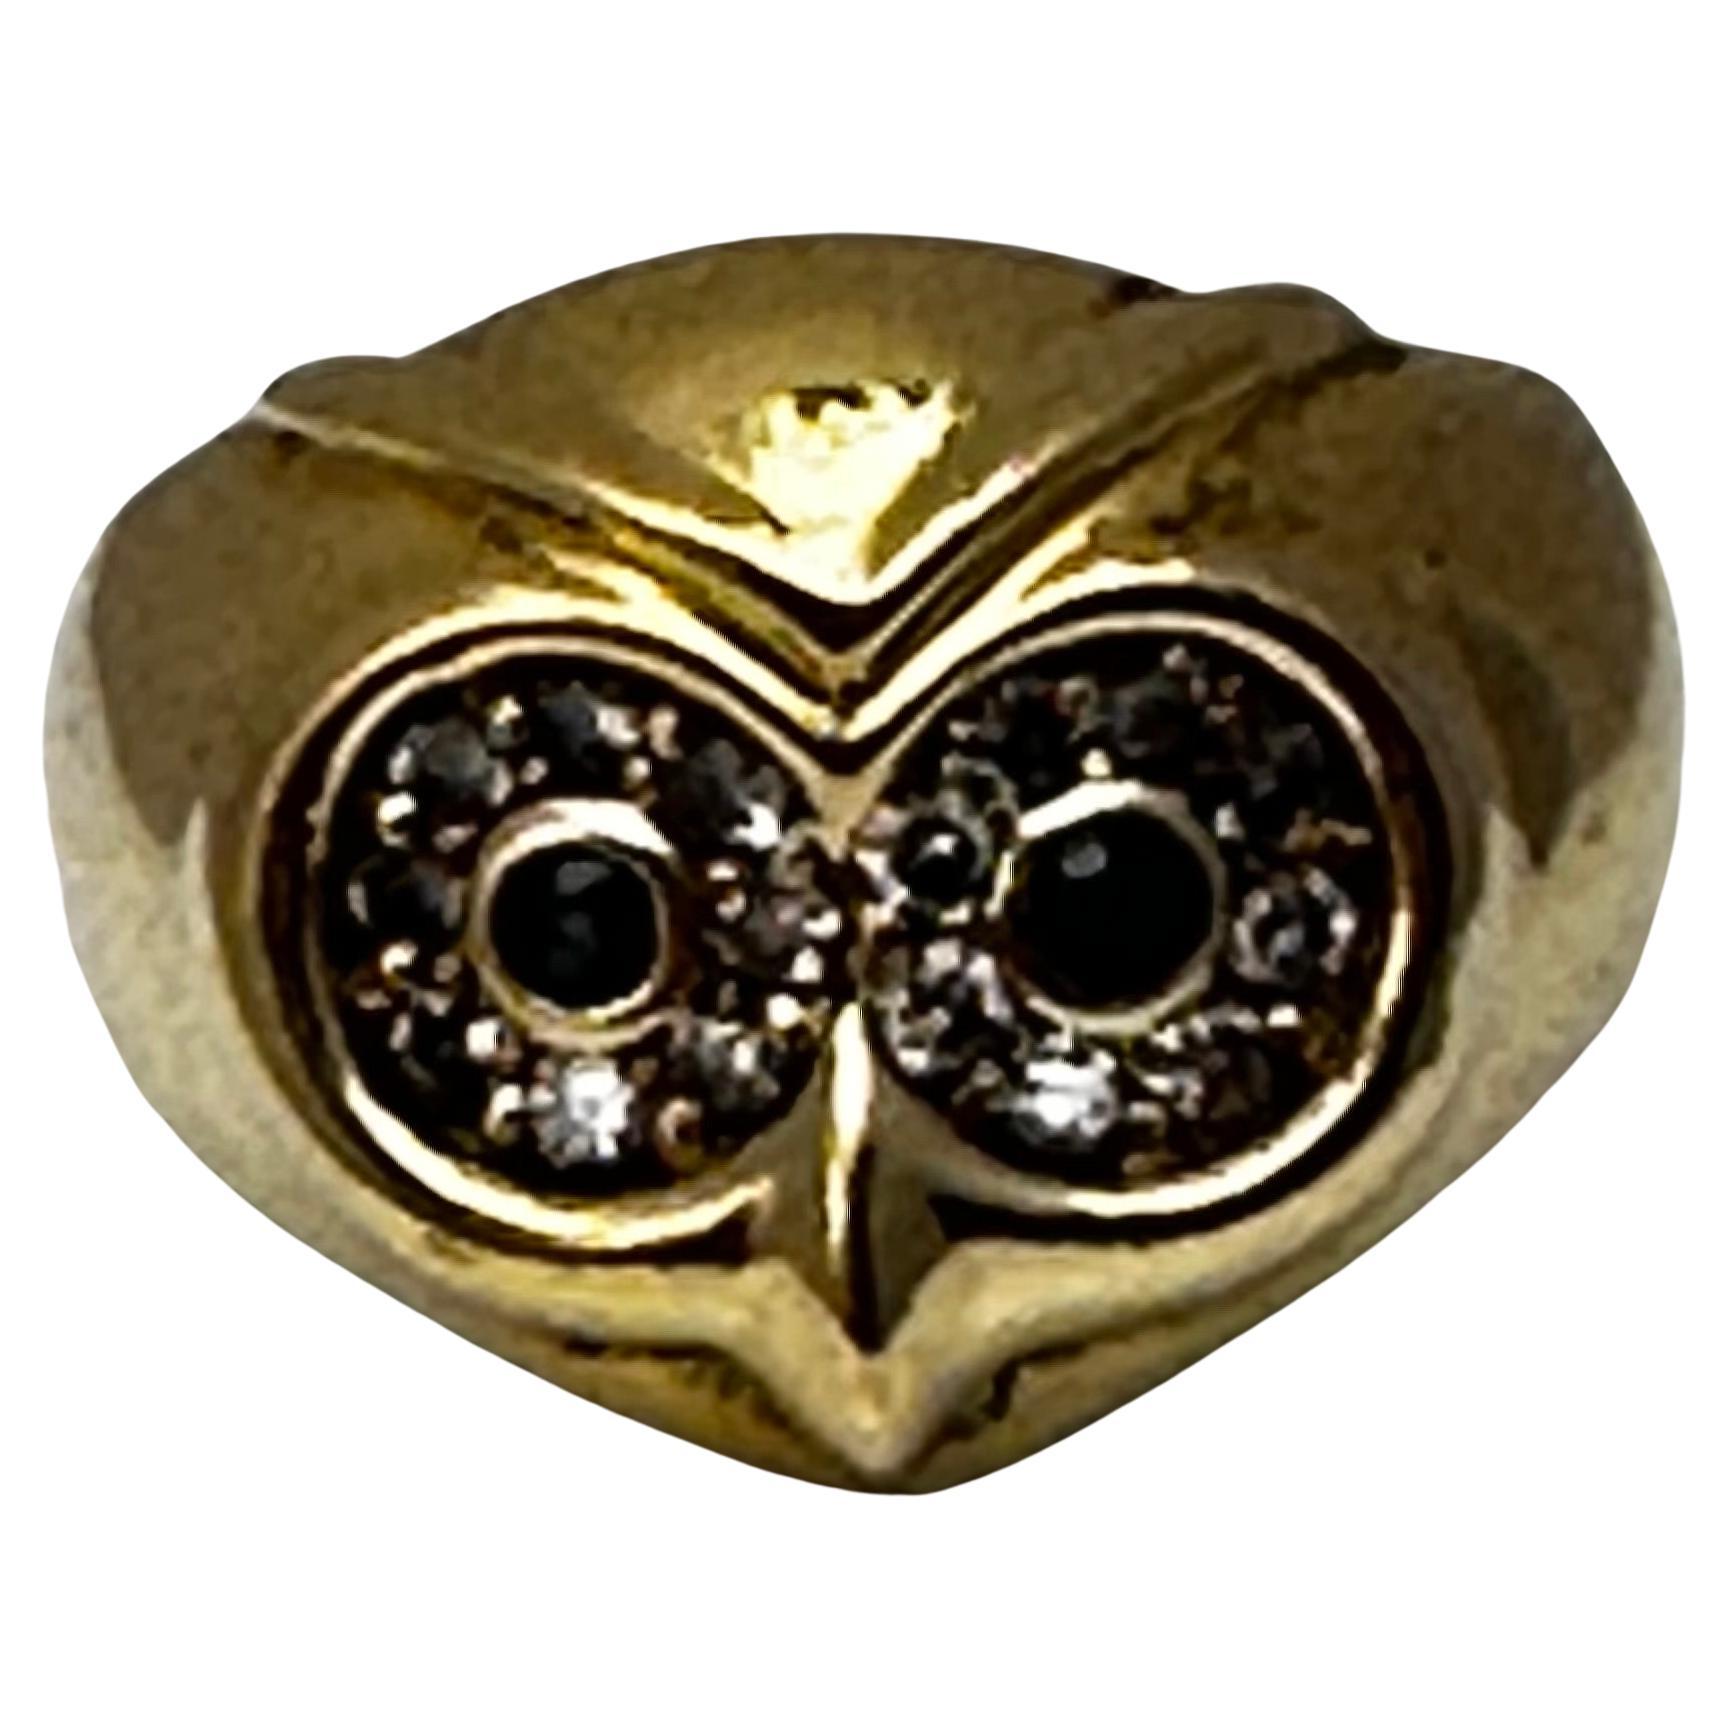 Vintage 18kt Yellow Gold 16mm Wide Sapphire Diamond OWL Ring Size 6 1/4

Owl symbolism and meanings include wisdom, intuition, supernatural power, independent thinking, and observant listening. The mysterious owl has been a subject in the